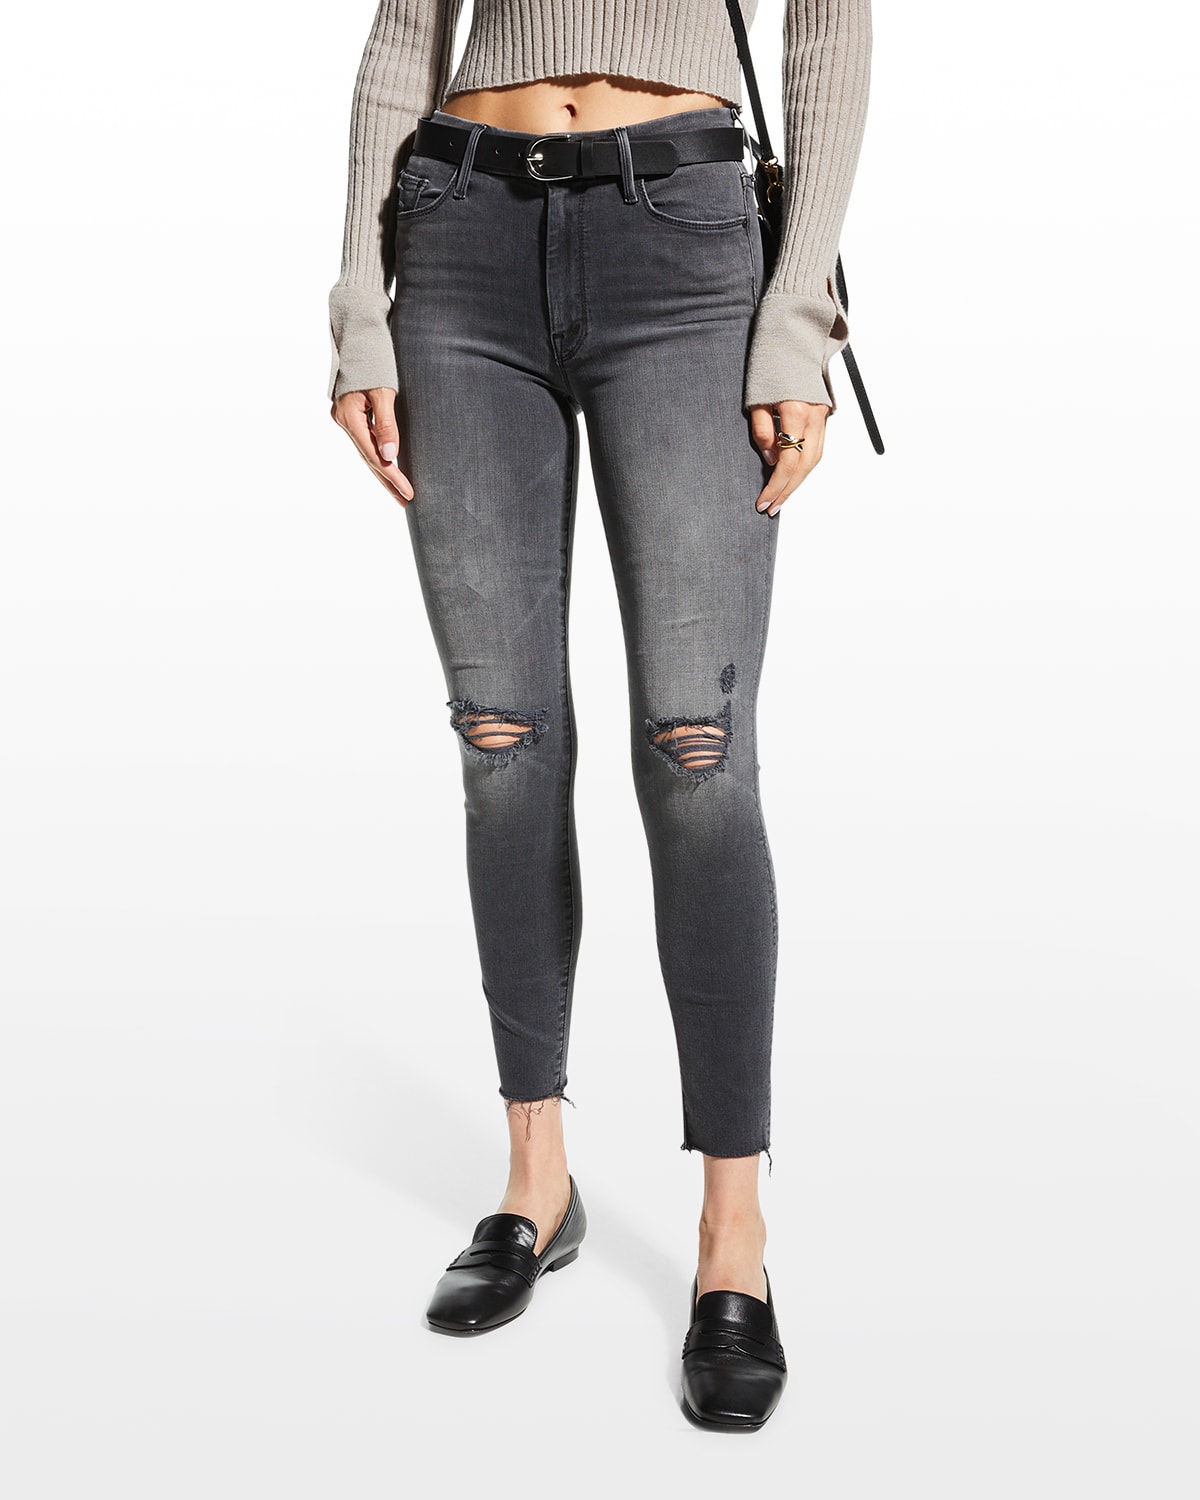 Looker Ankle Fray Distressed Jeans